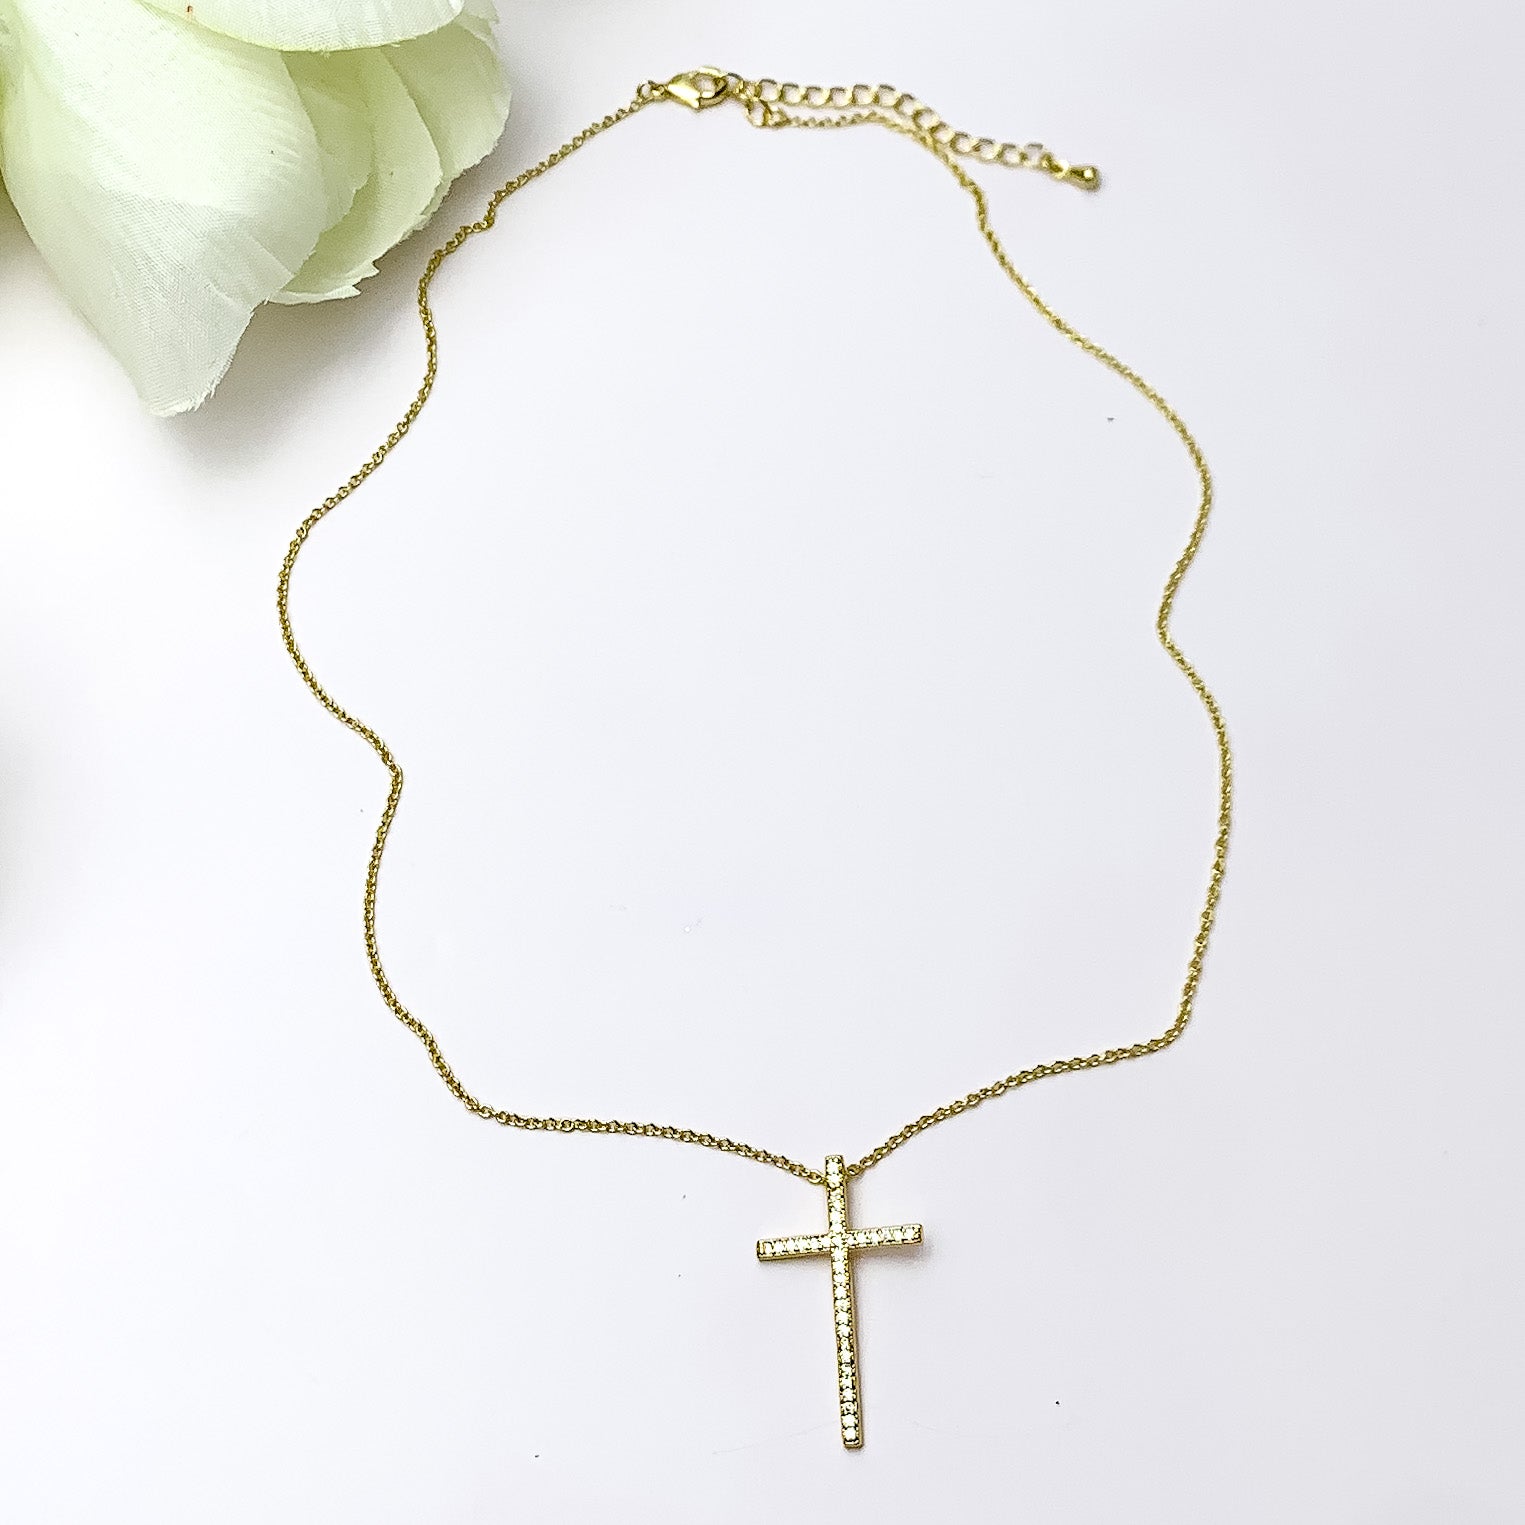 Gold Tone Necklace With Clear Crystal Cross Charm. Pictured on a white background with a piece of wood behind the necklace.